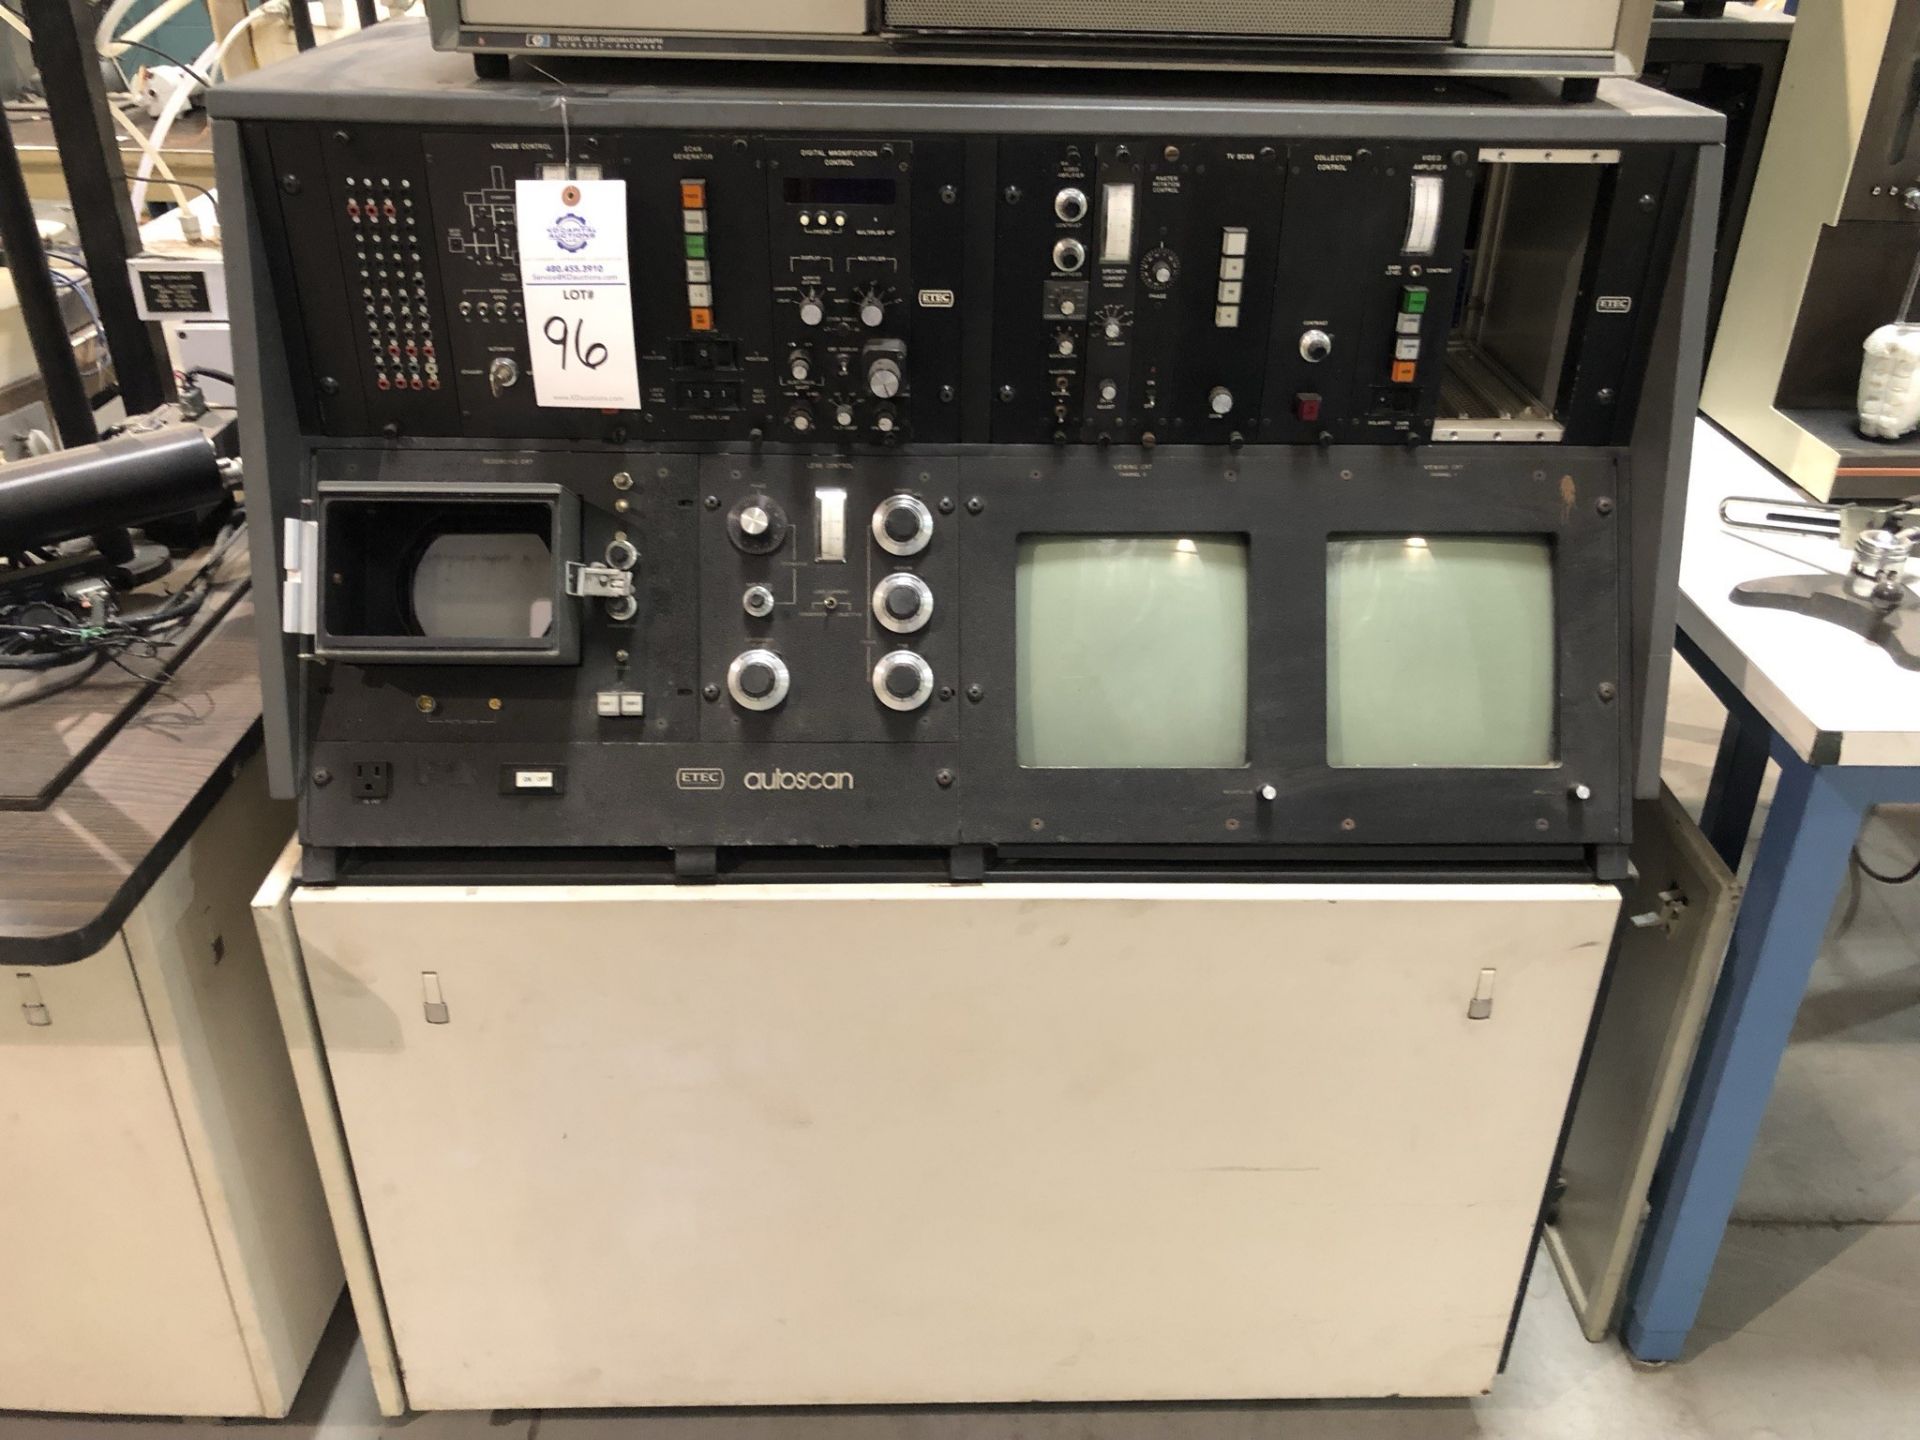 ETEC Autoscan SEM control console, Hewlett Packard model 5830A gas chromatograph system. (See - Image 4 of 7